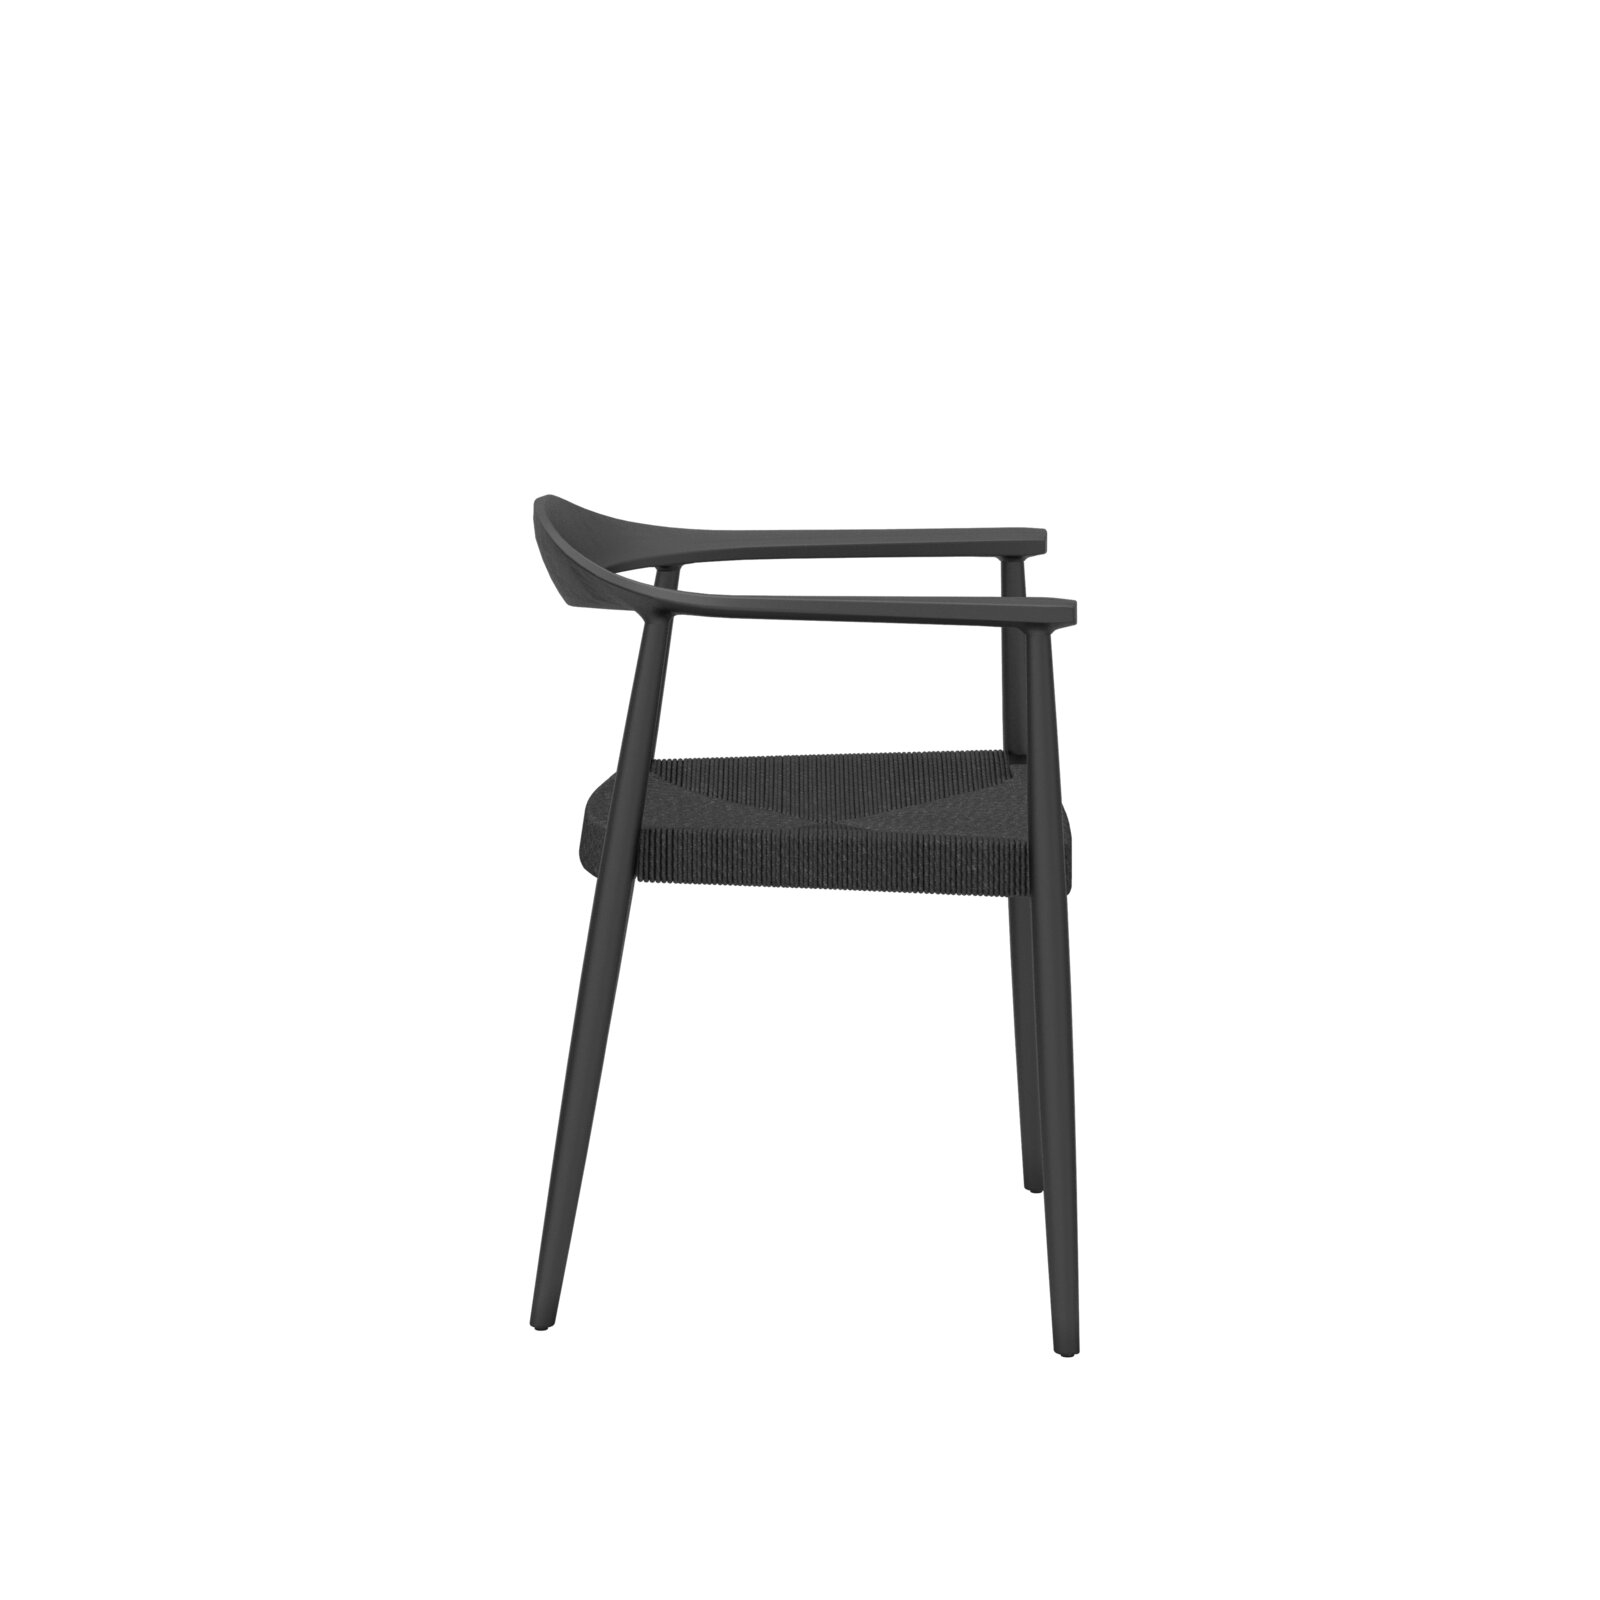 Milam Wishbone Wooden Guest Chair by Etc. - Image 2